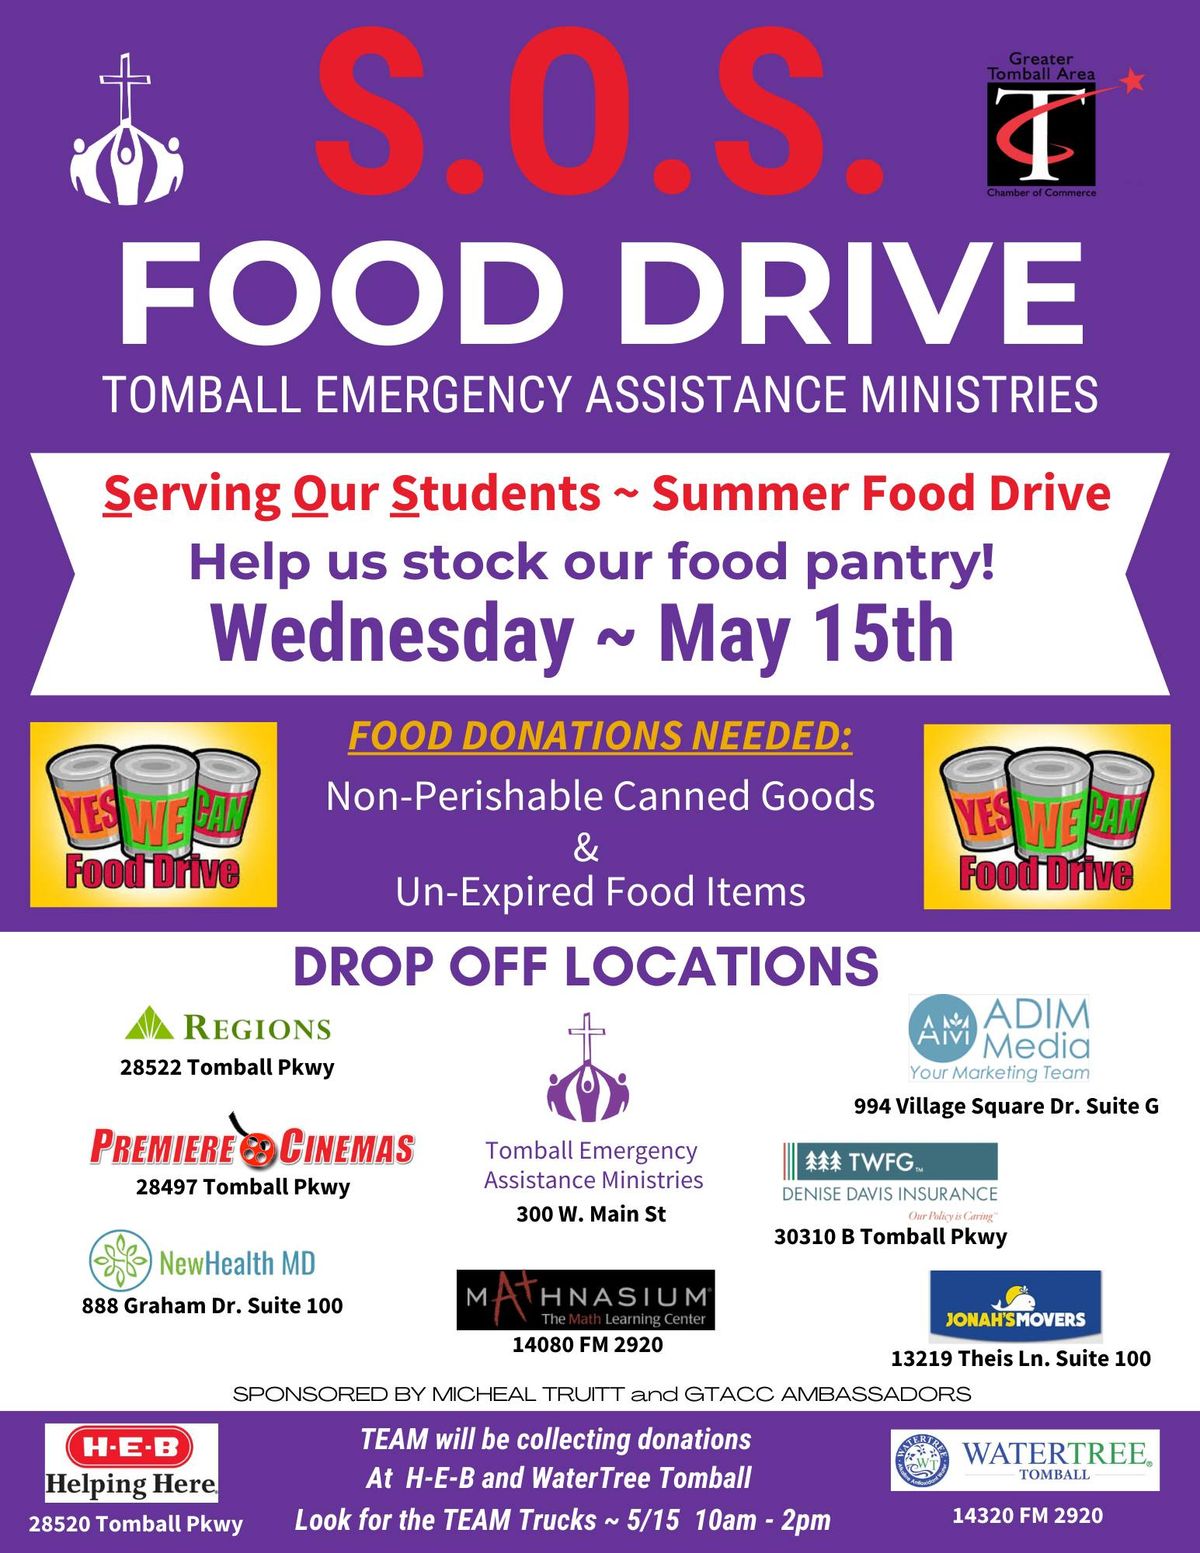 S.O.S Food Drive Sponsored By Micheal Truitt and GTACC Ambassadors